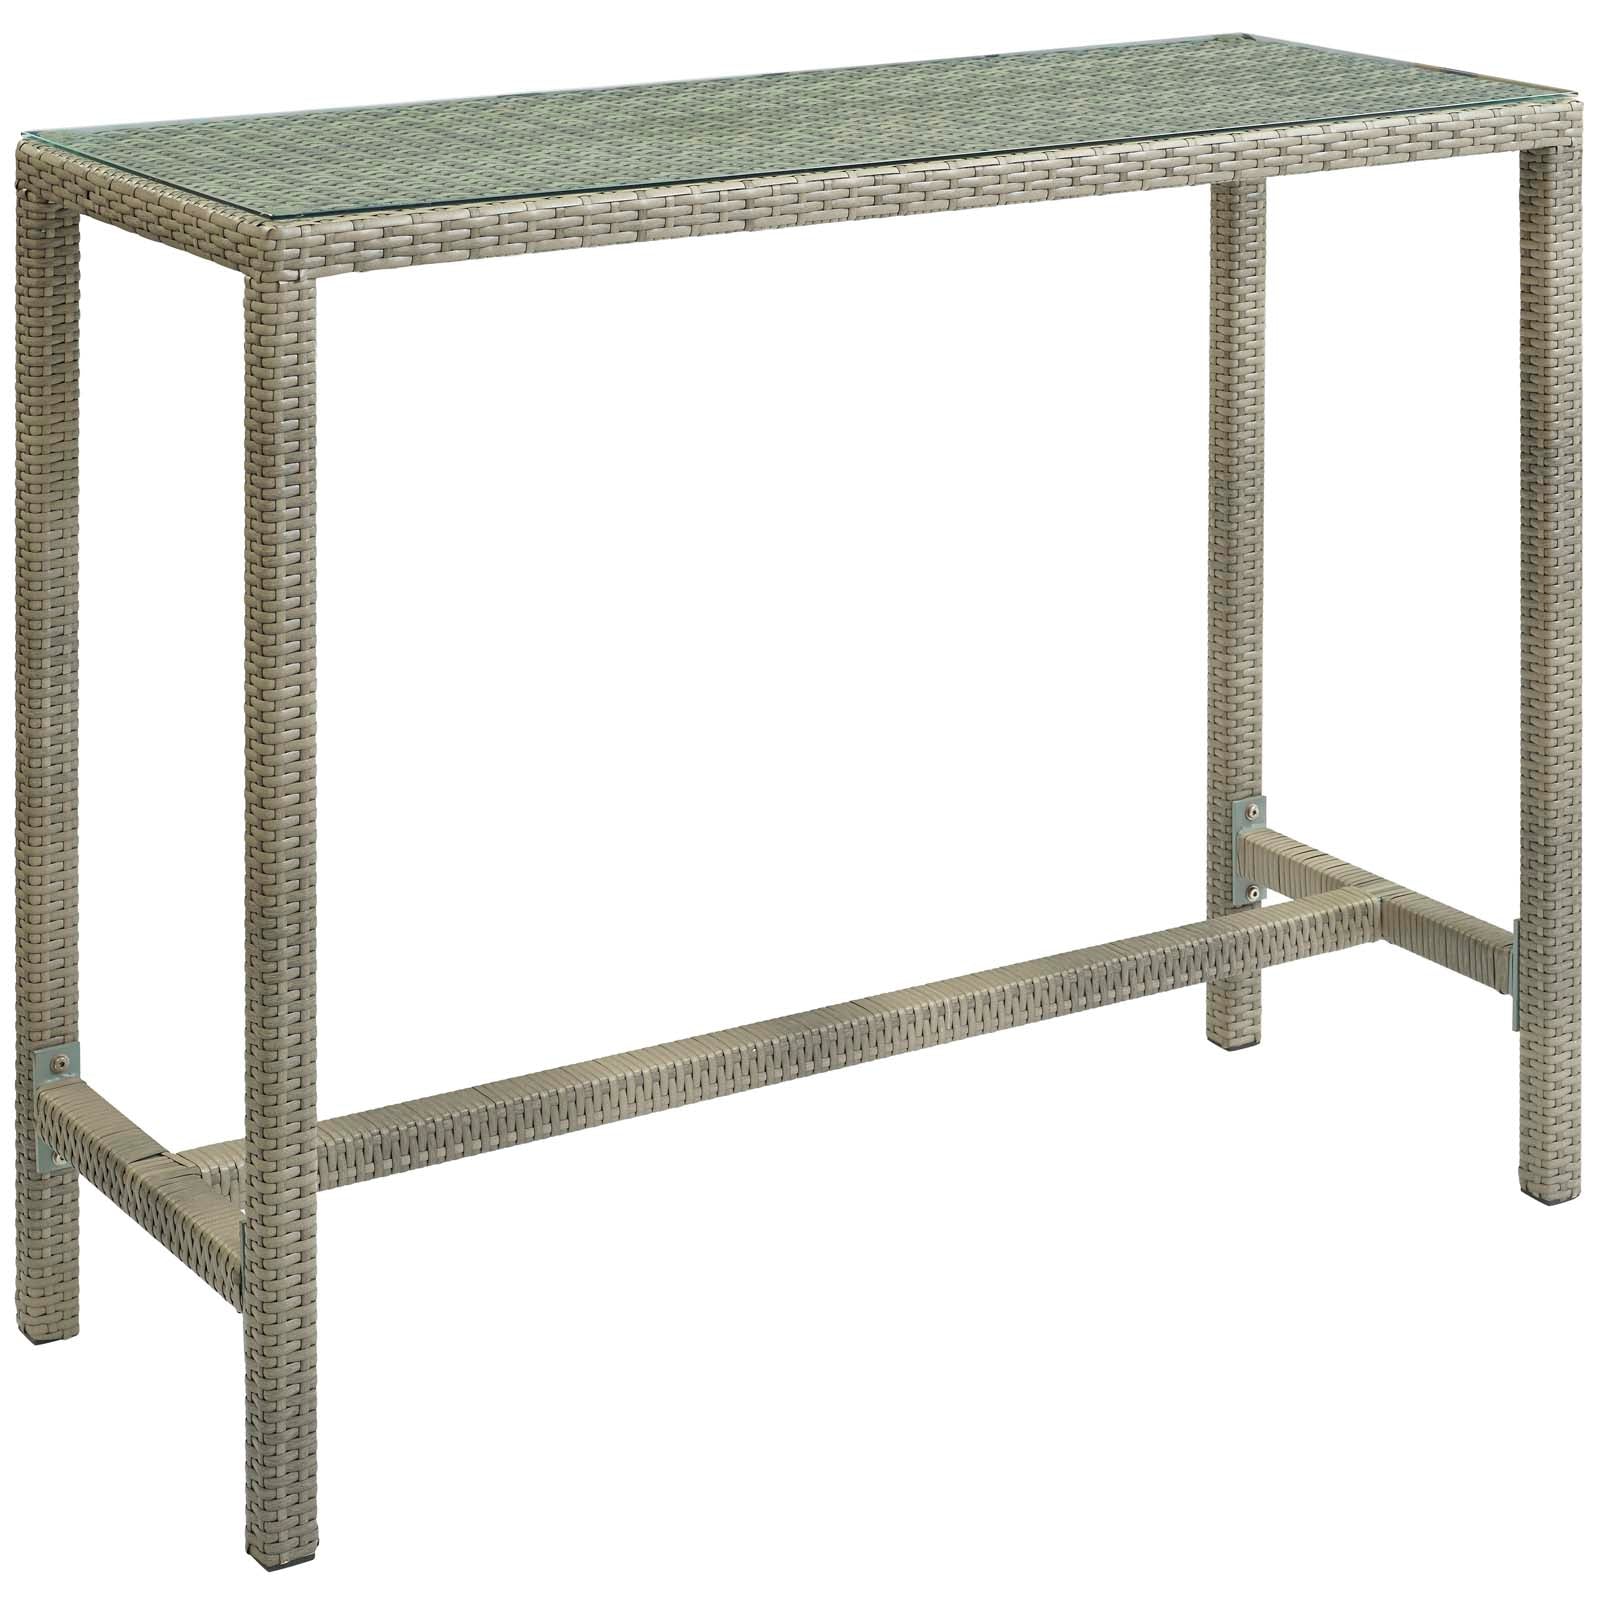 Conduit Outdoor Patio Wicker Rattan Large Bar Table-Outdoor Bar Table-Modway-Wall2Wall Furnishings